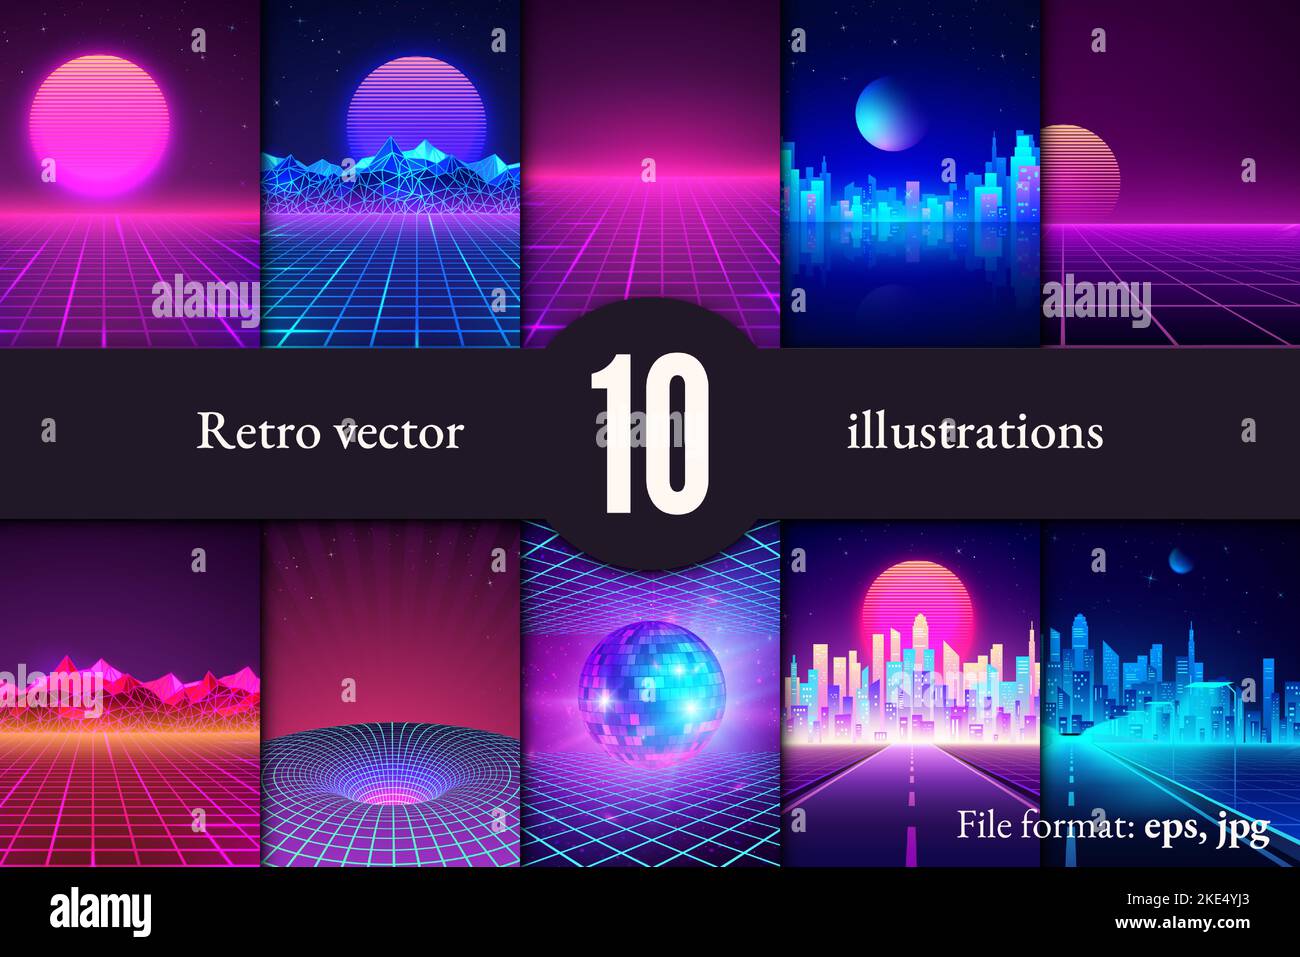 Set of retro futuristic backgrounds. Rave party flyer design template in 80s style. Retro cityscape, mountain landscape sunset skyline illustrations. Stock Vector